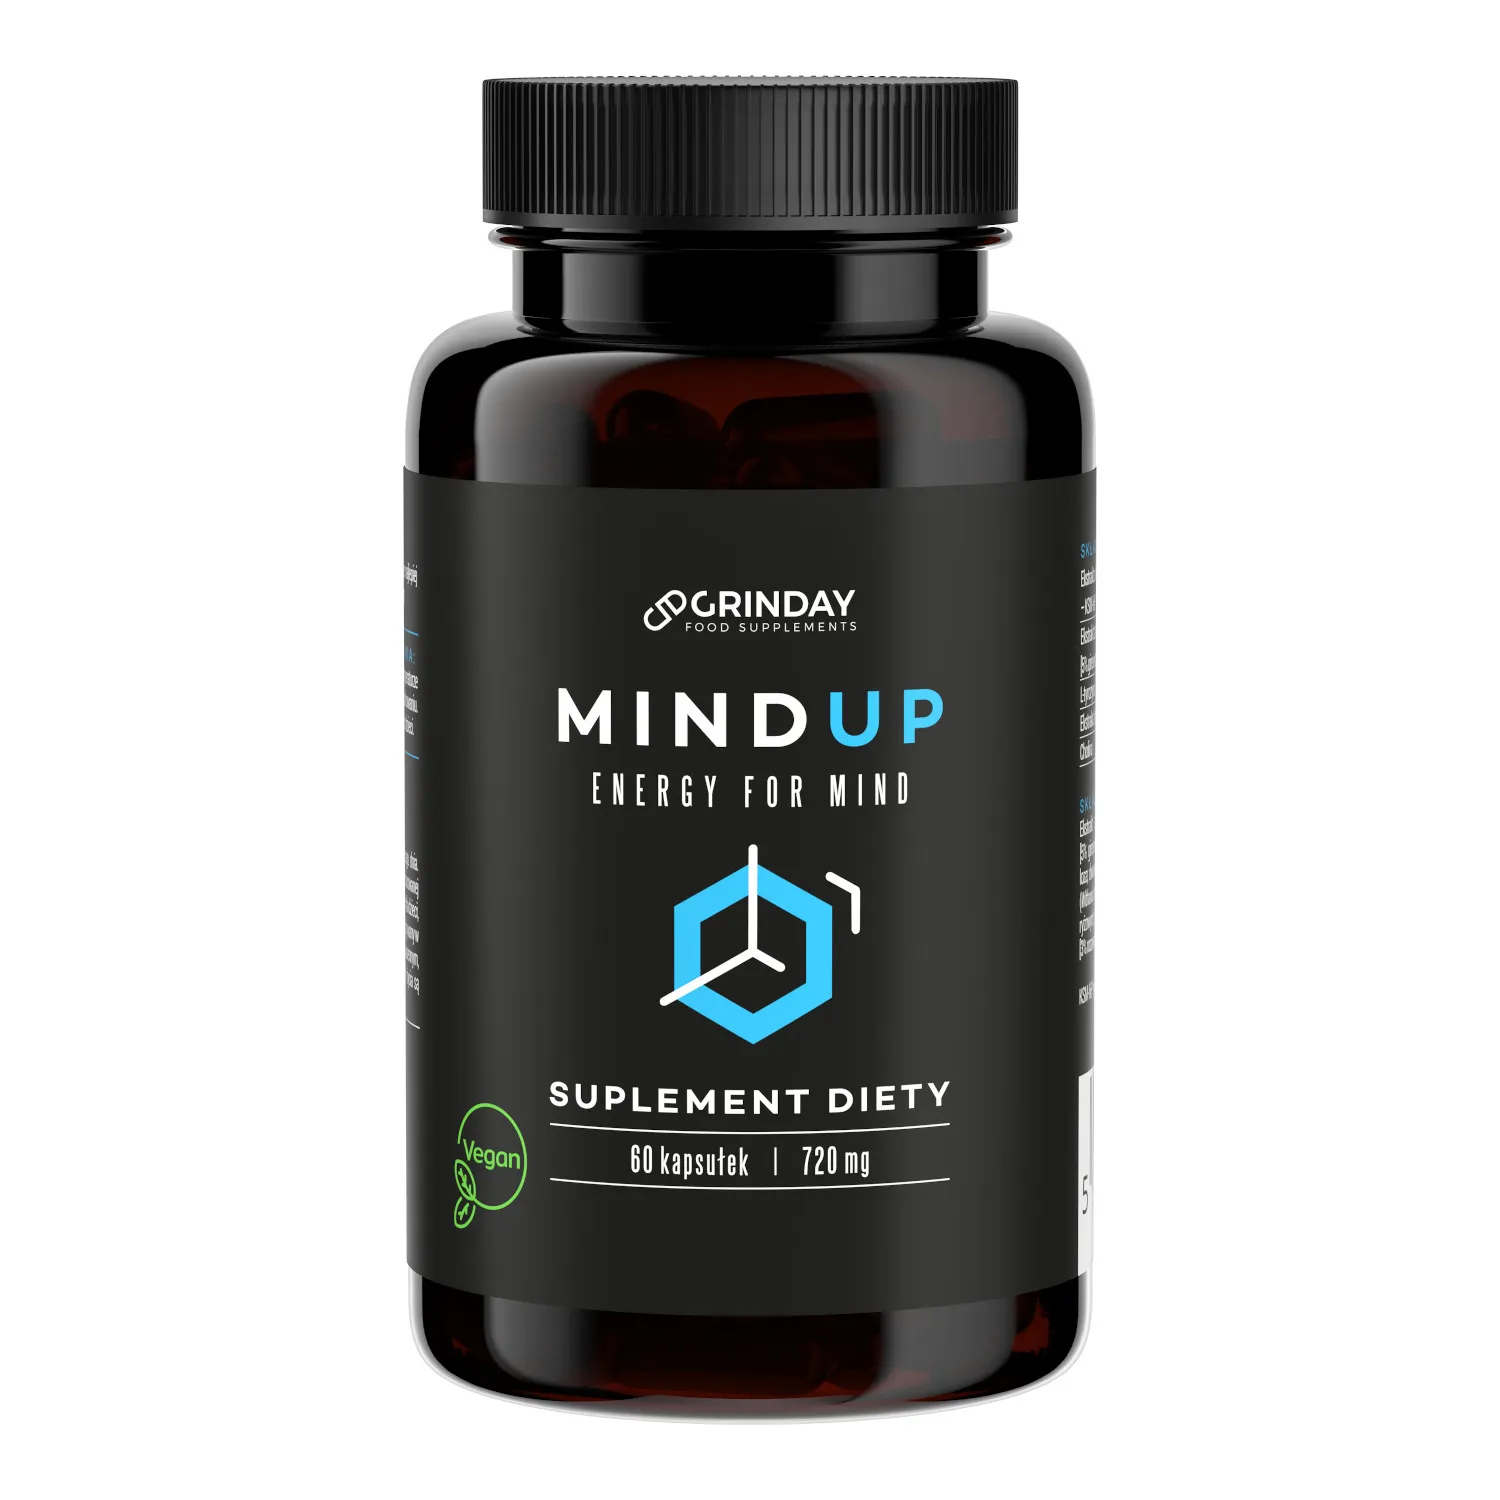 Grinday Mind Up, suplement diety, 720 mg, 60 kapsułek